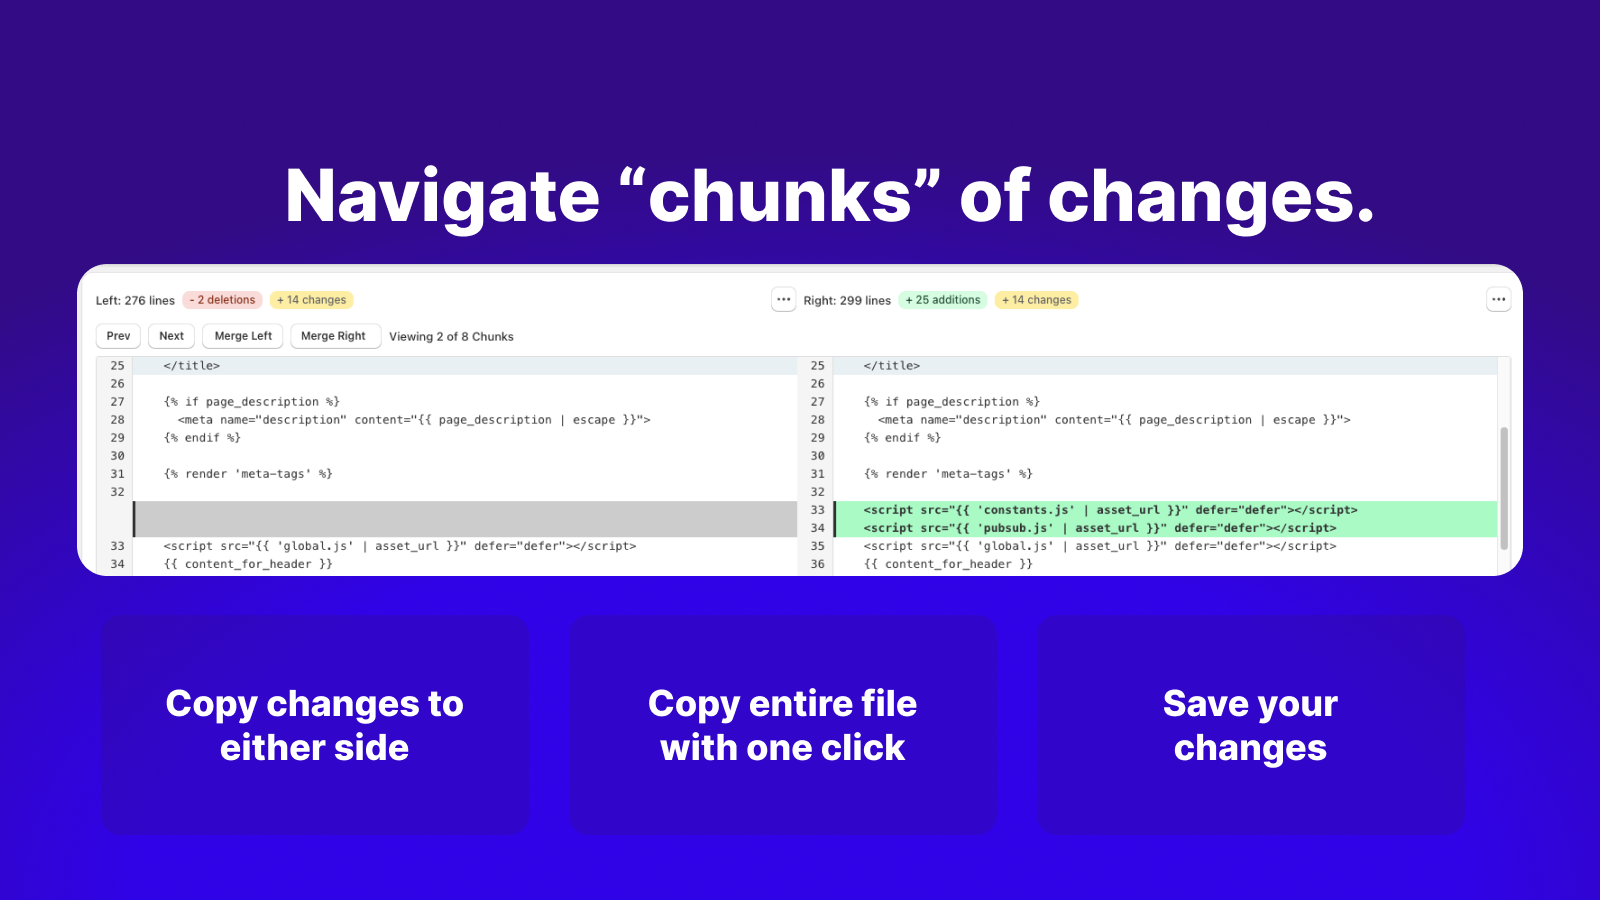 Navigate chunks of changes for an asset and copy over to theme